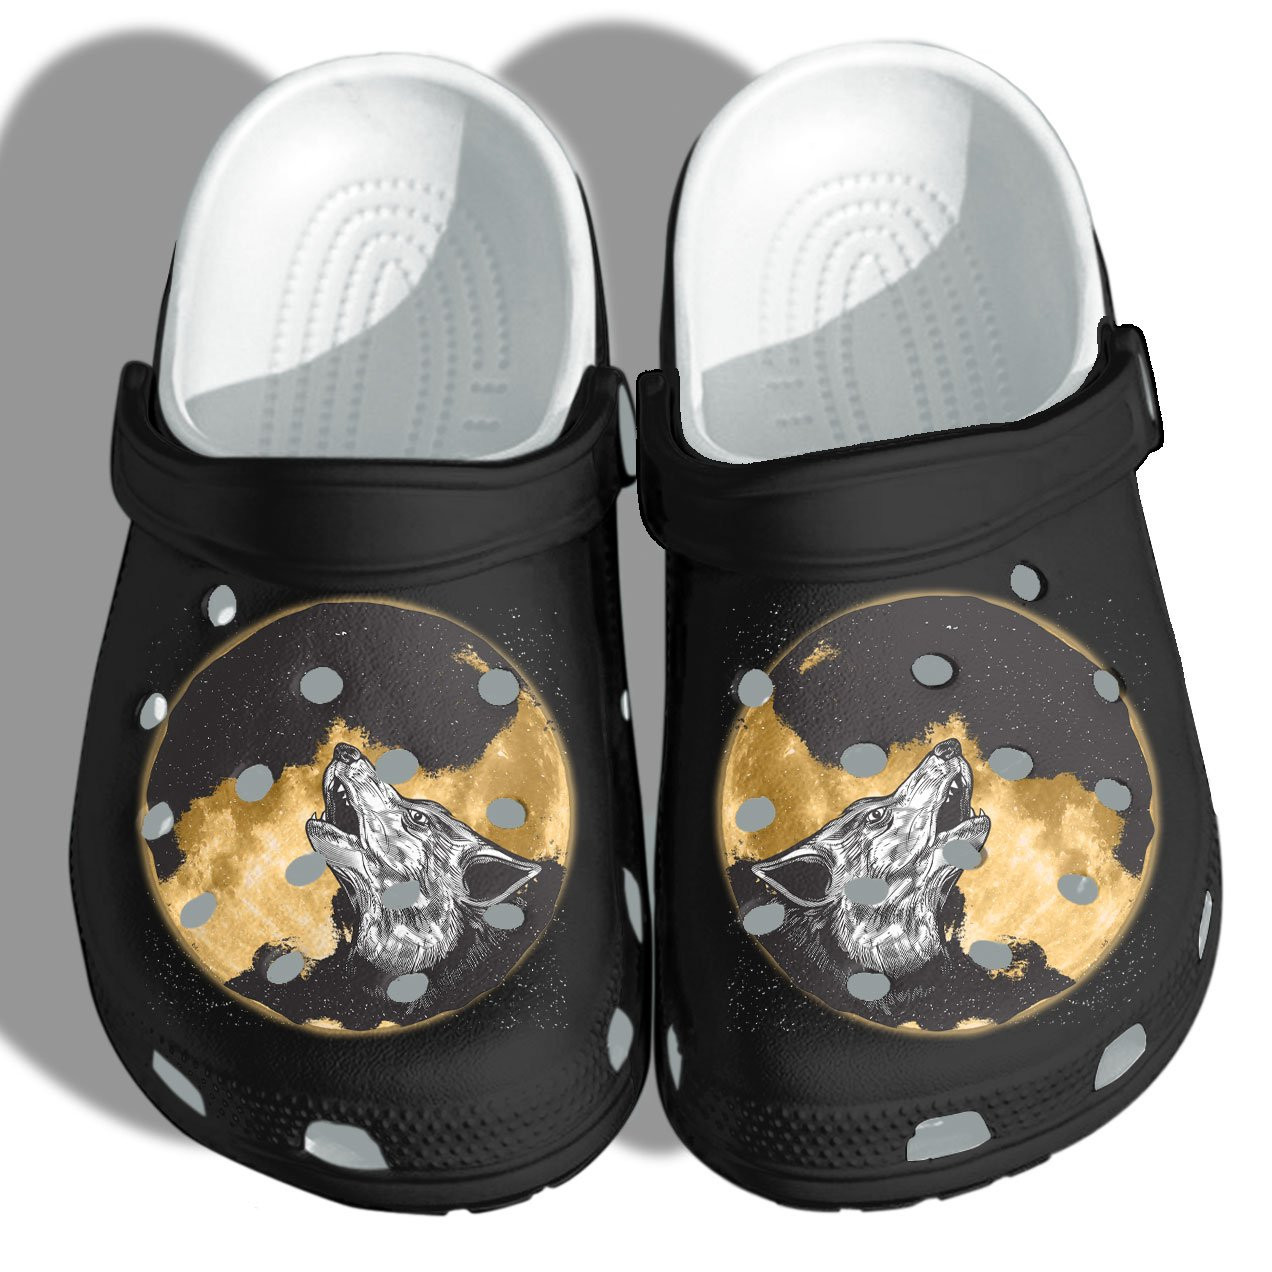 Wolf Shoes Crocs Wolf Fantasy Moon Camping Lover Croc Shoes